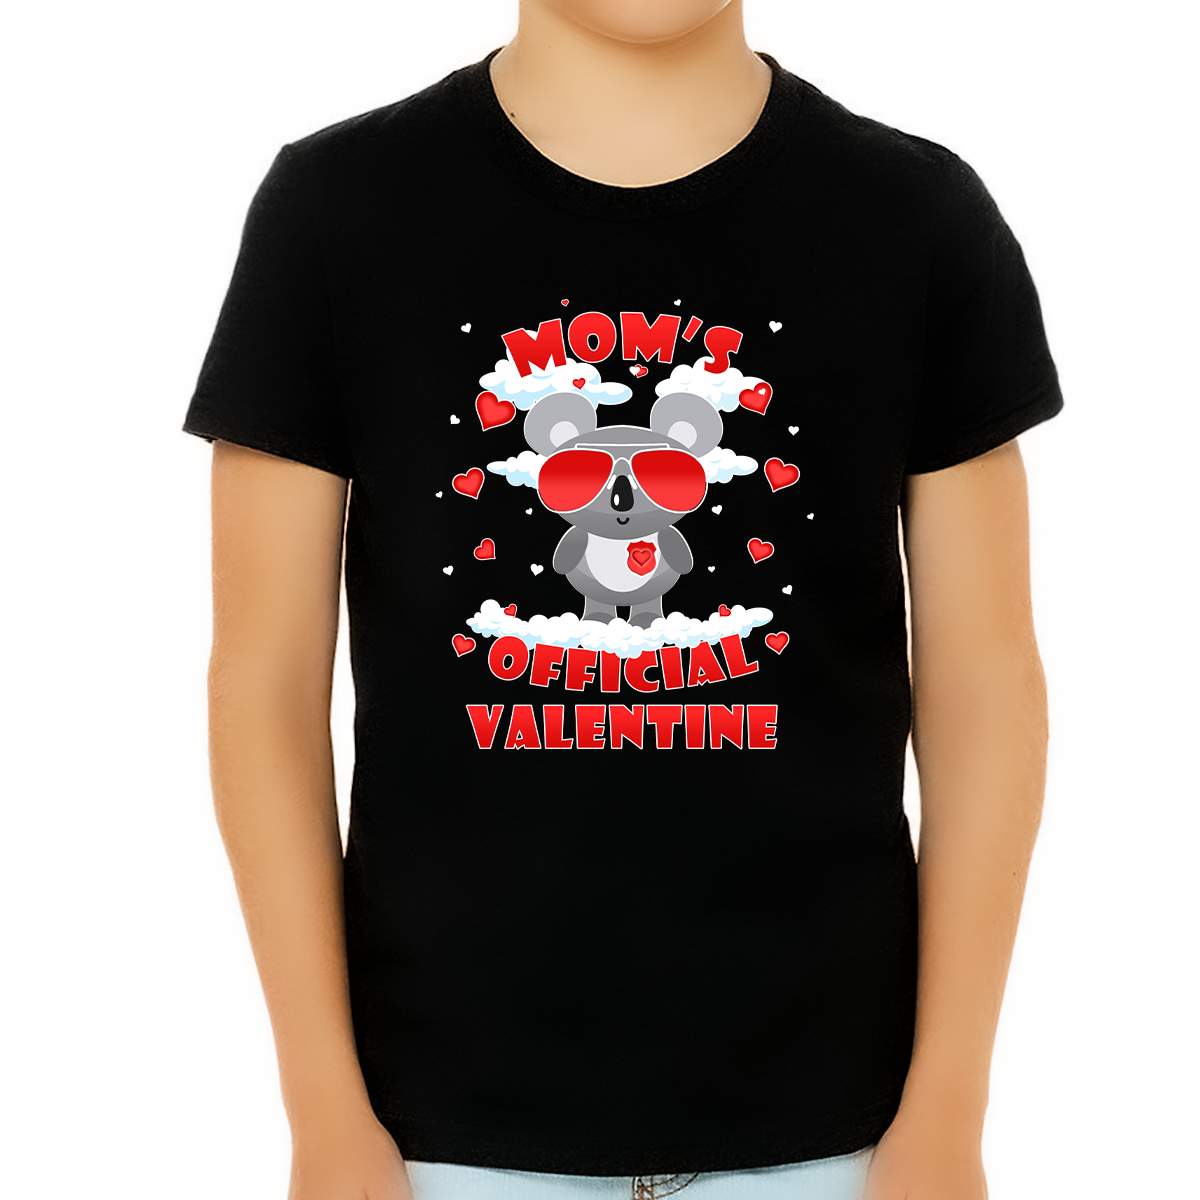 Fire Fit Designs Funny Boys Valentines Day Shirt Mom's Official Valentine Shirt Cute Valentines Day Gifts for Kids